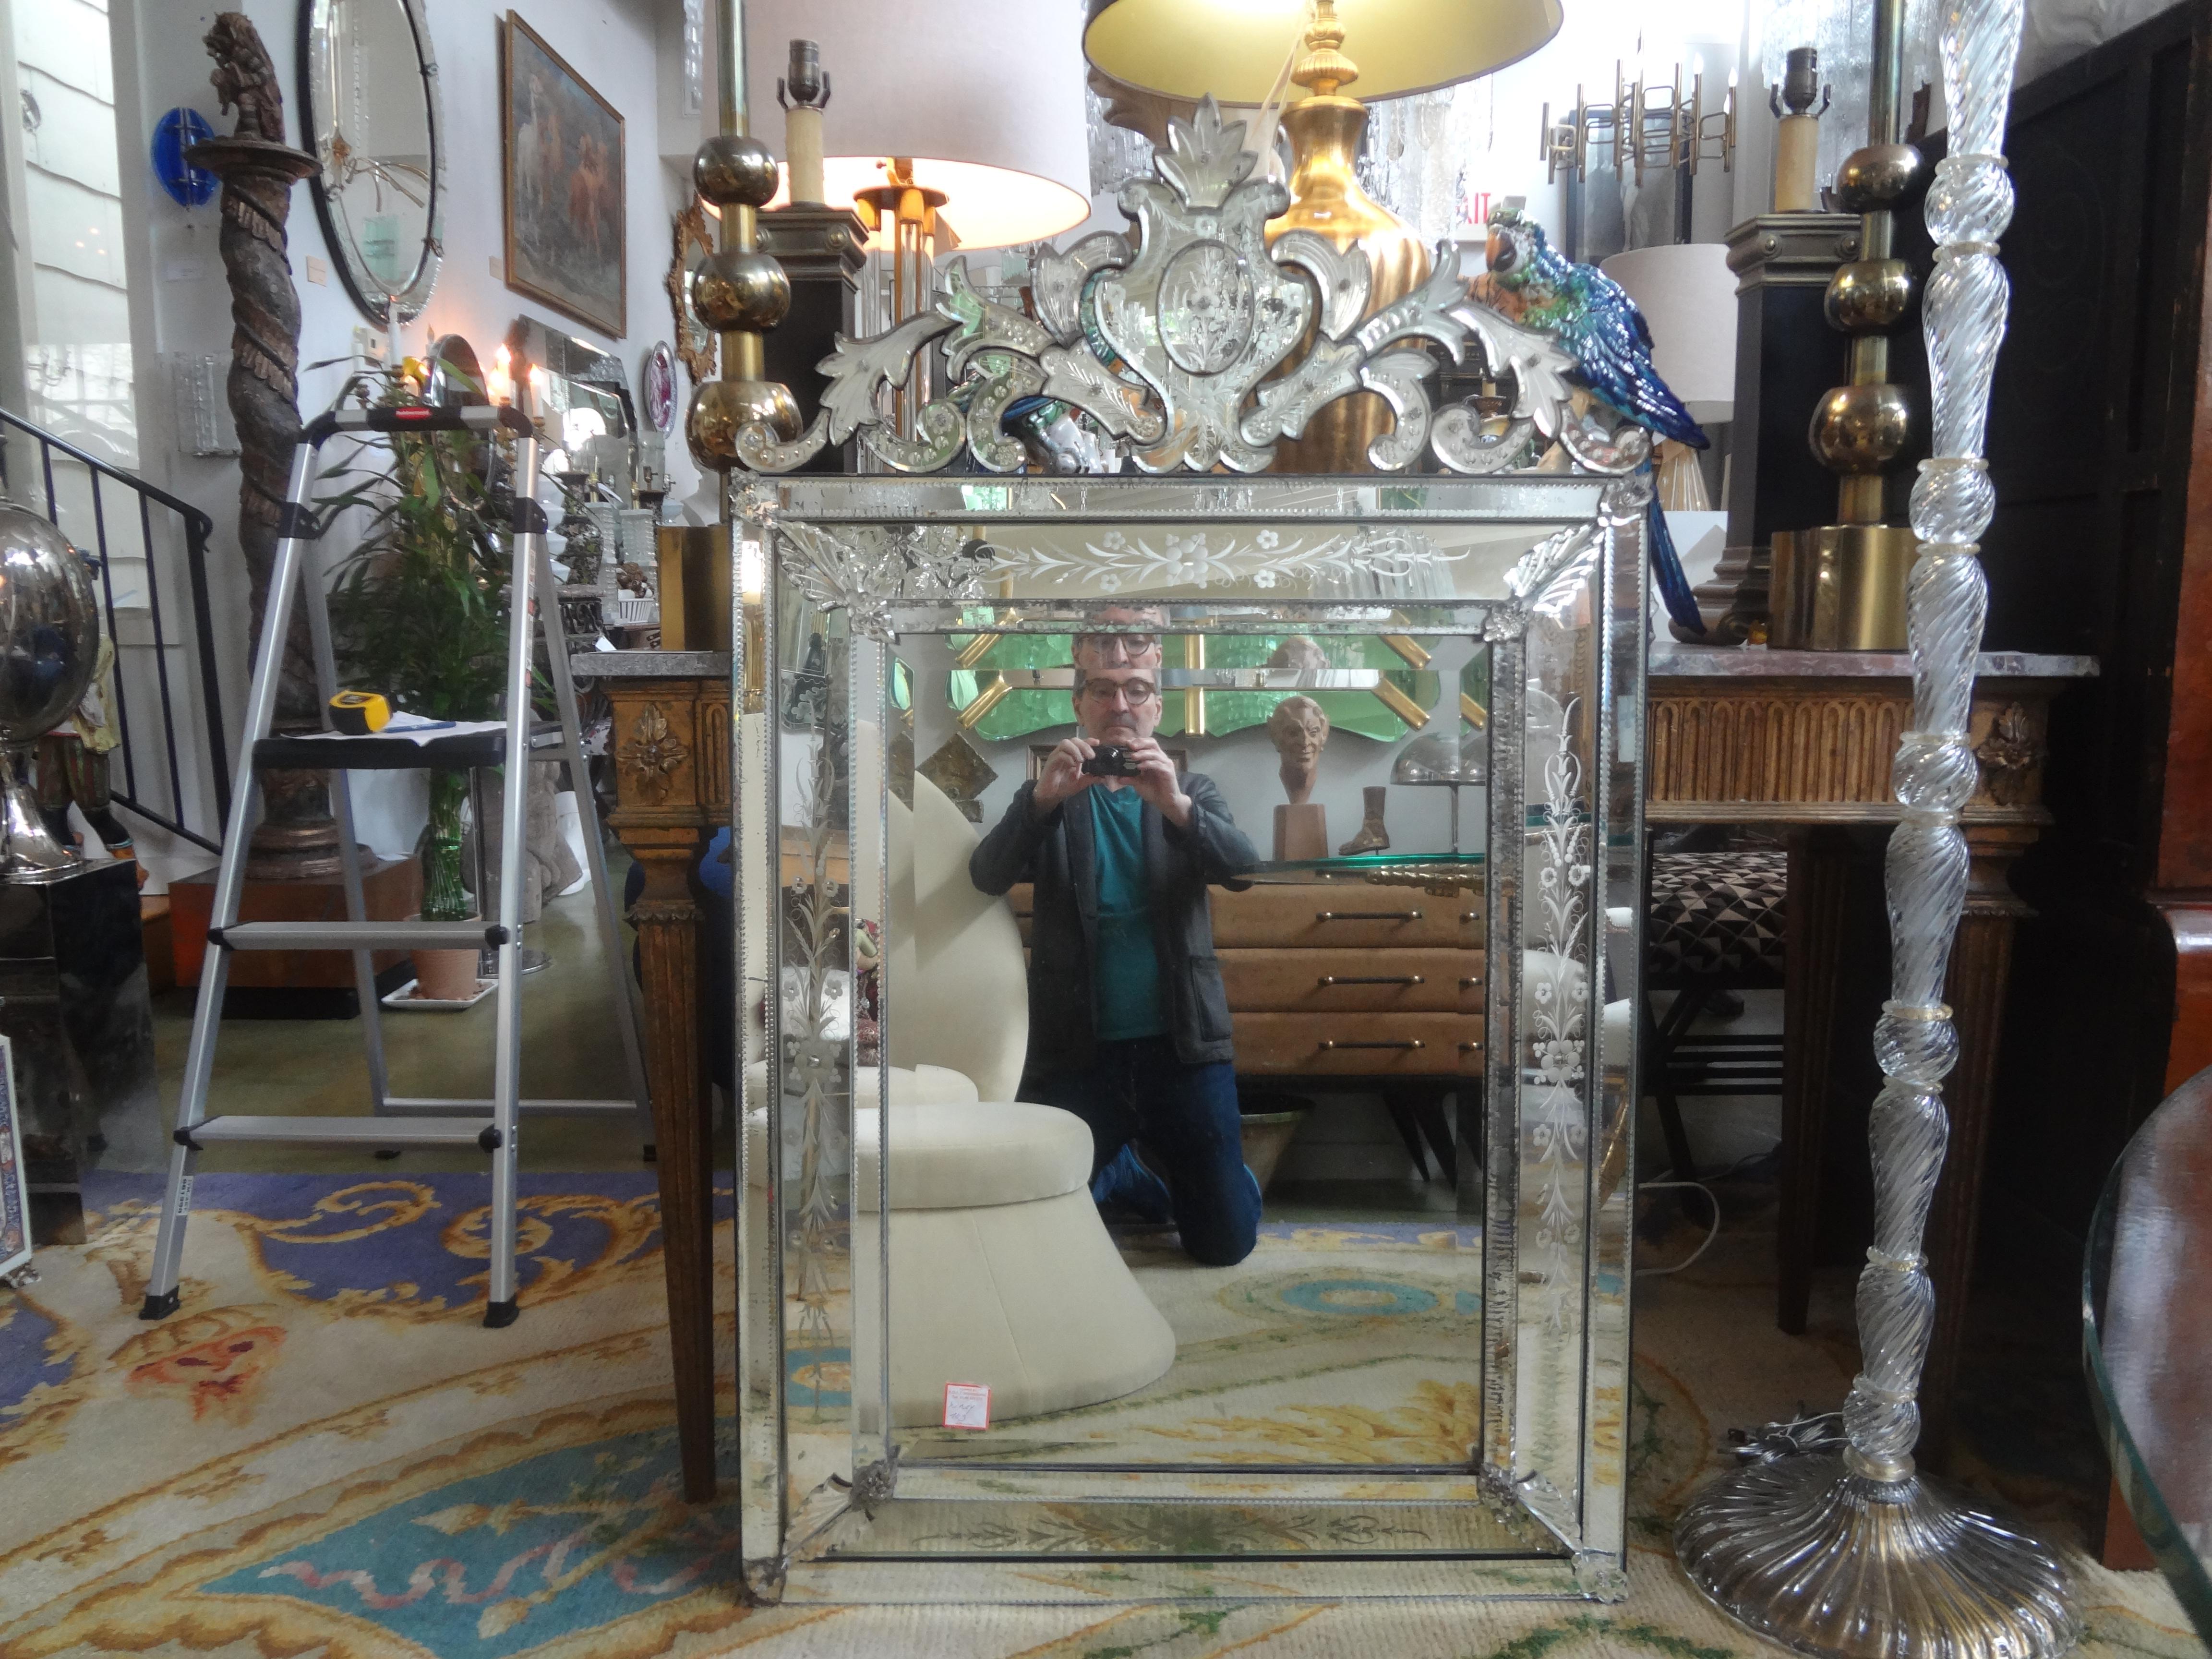 Large antique etched and beveled Venetian mirror.
Stunning etched and beveled rectangular Baroque style Venetian mirror. This large antique Venetian mirror is in great condition with some naturally occurring age related foxing. This versatile